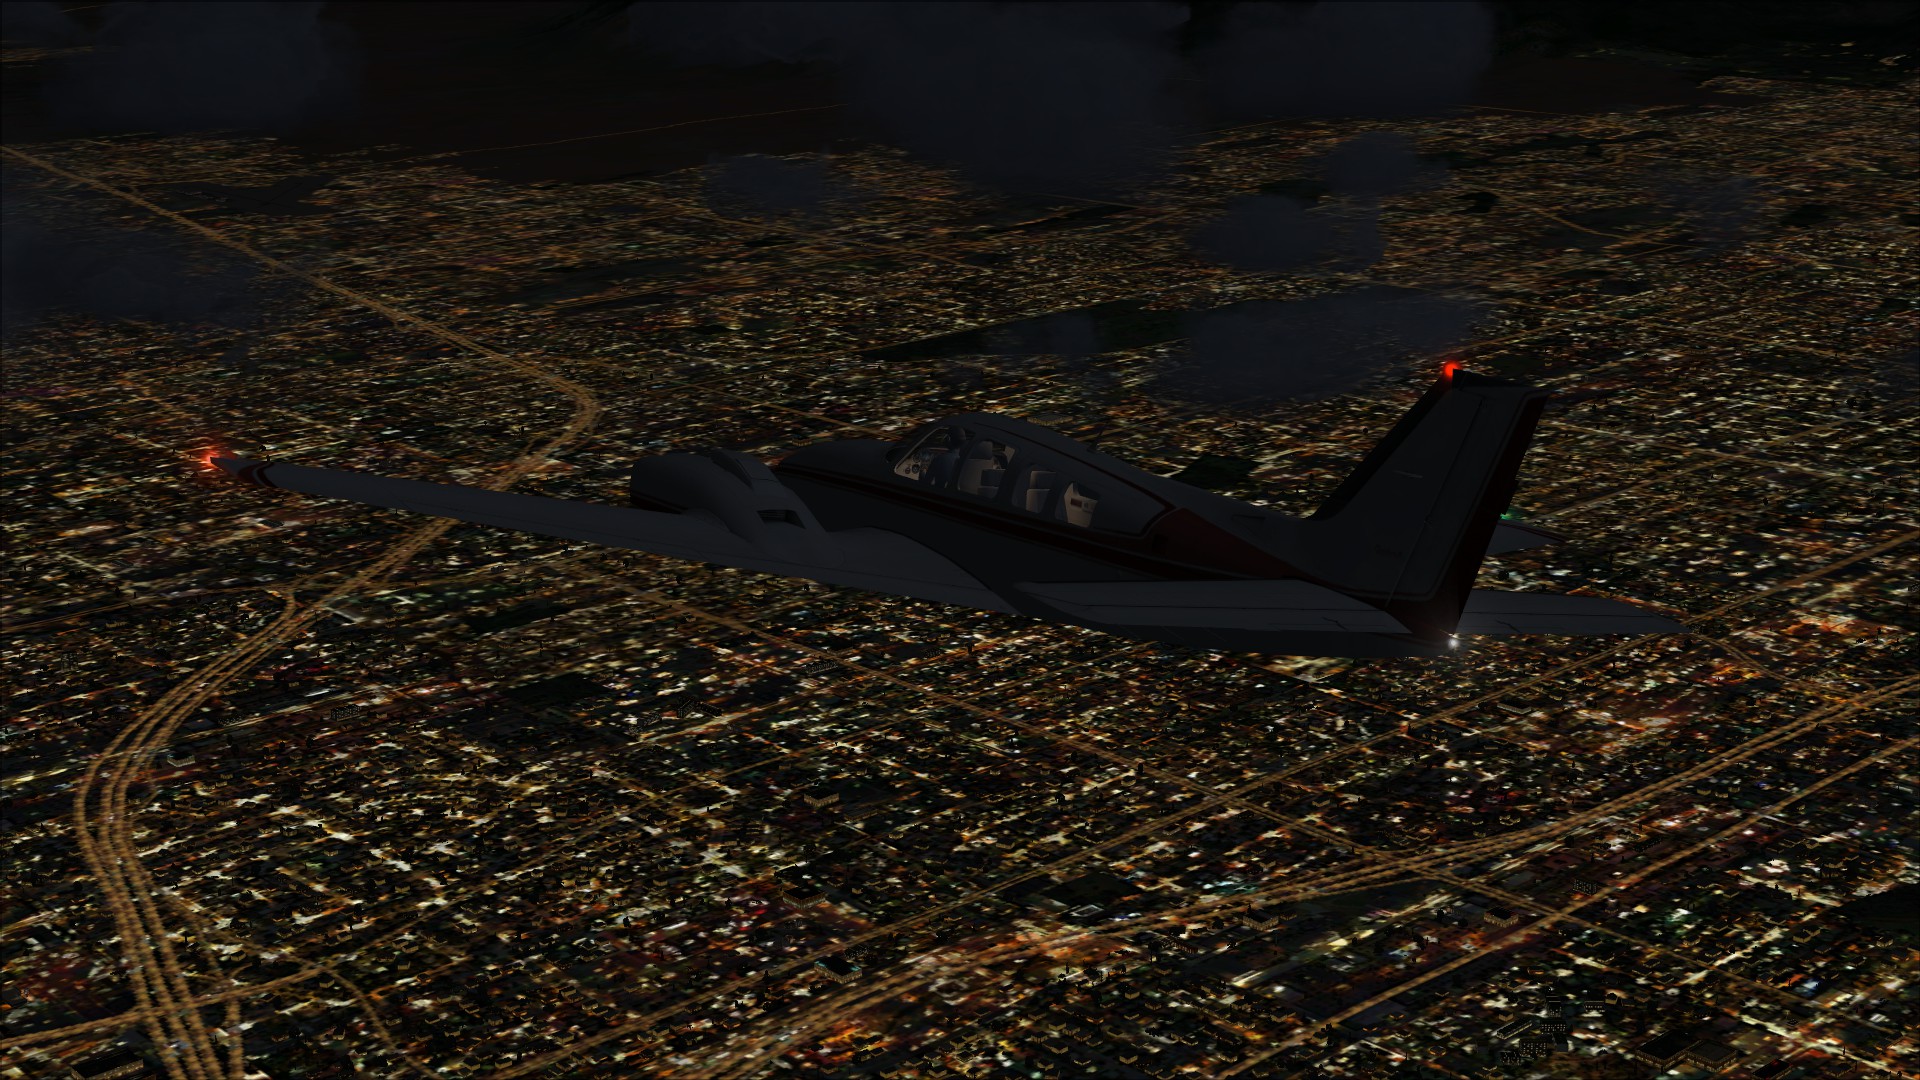 FSX Steam Edition: Night Environment Italy Add-On on Steam